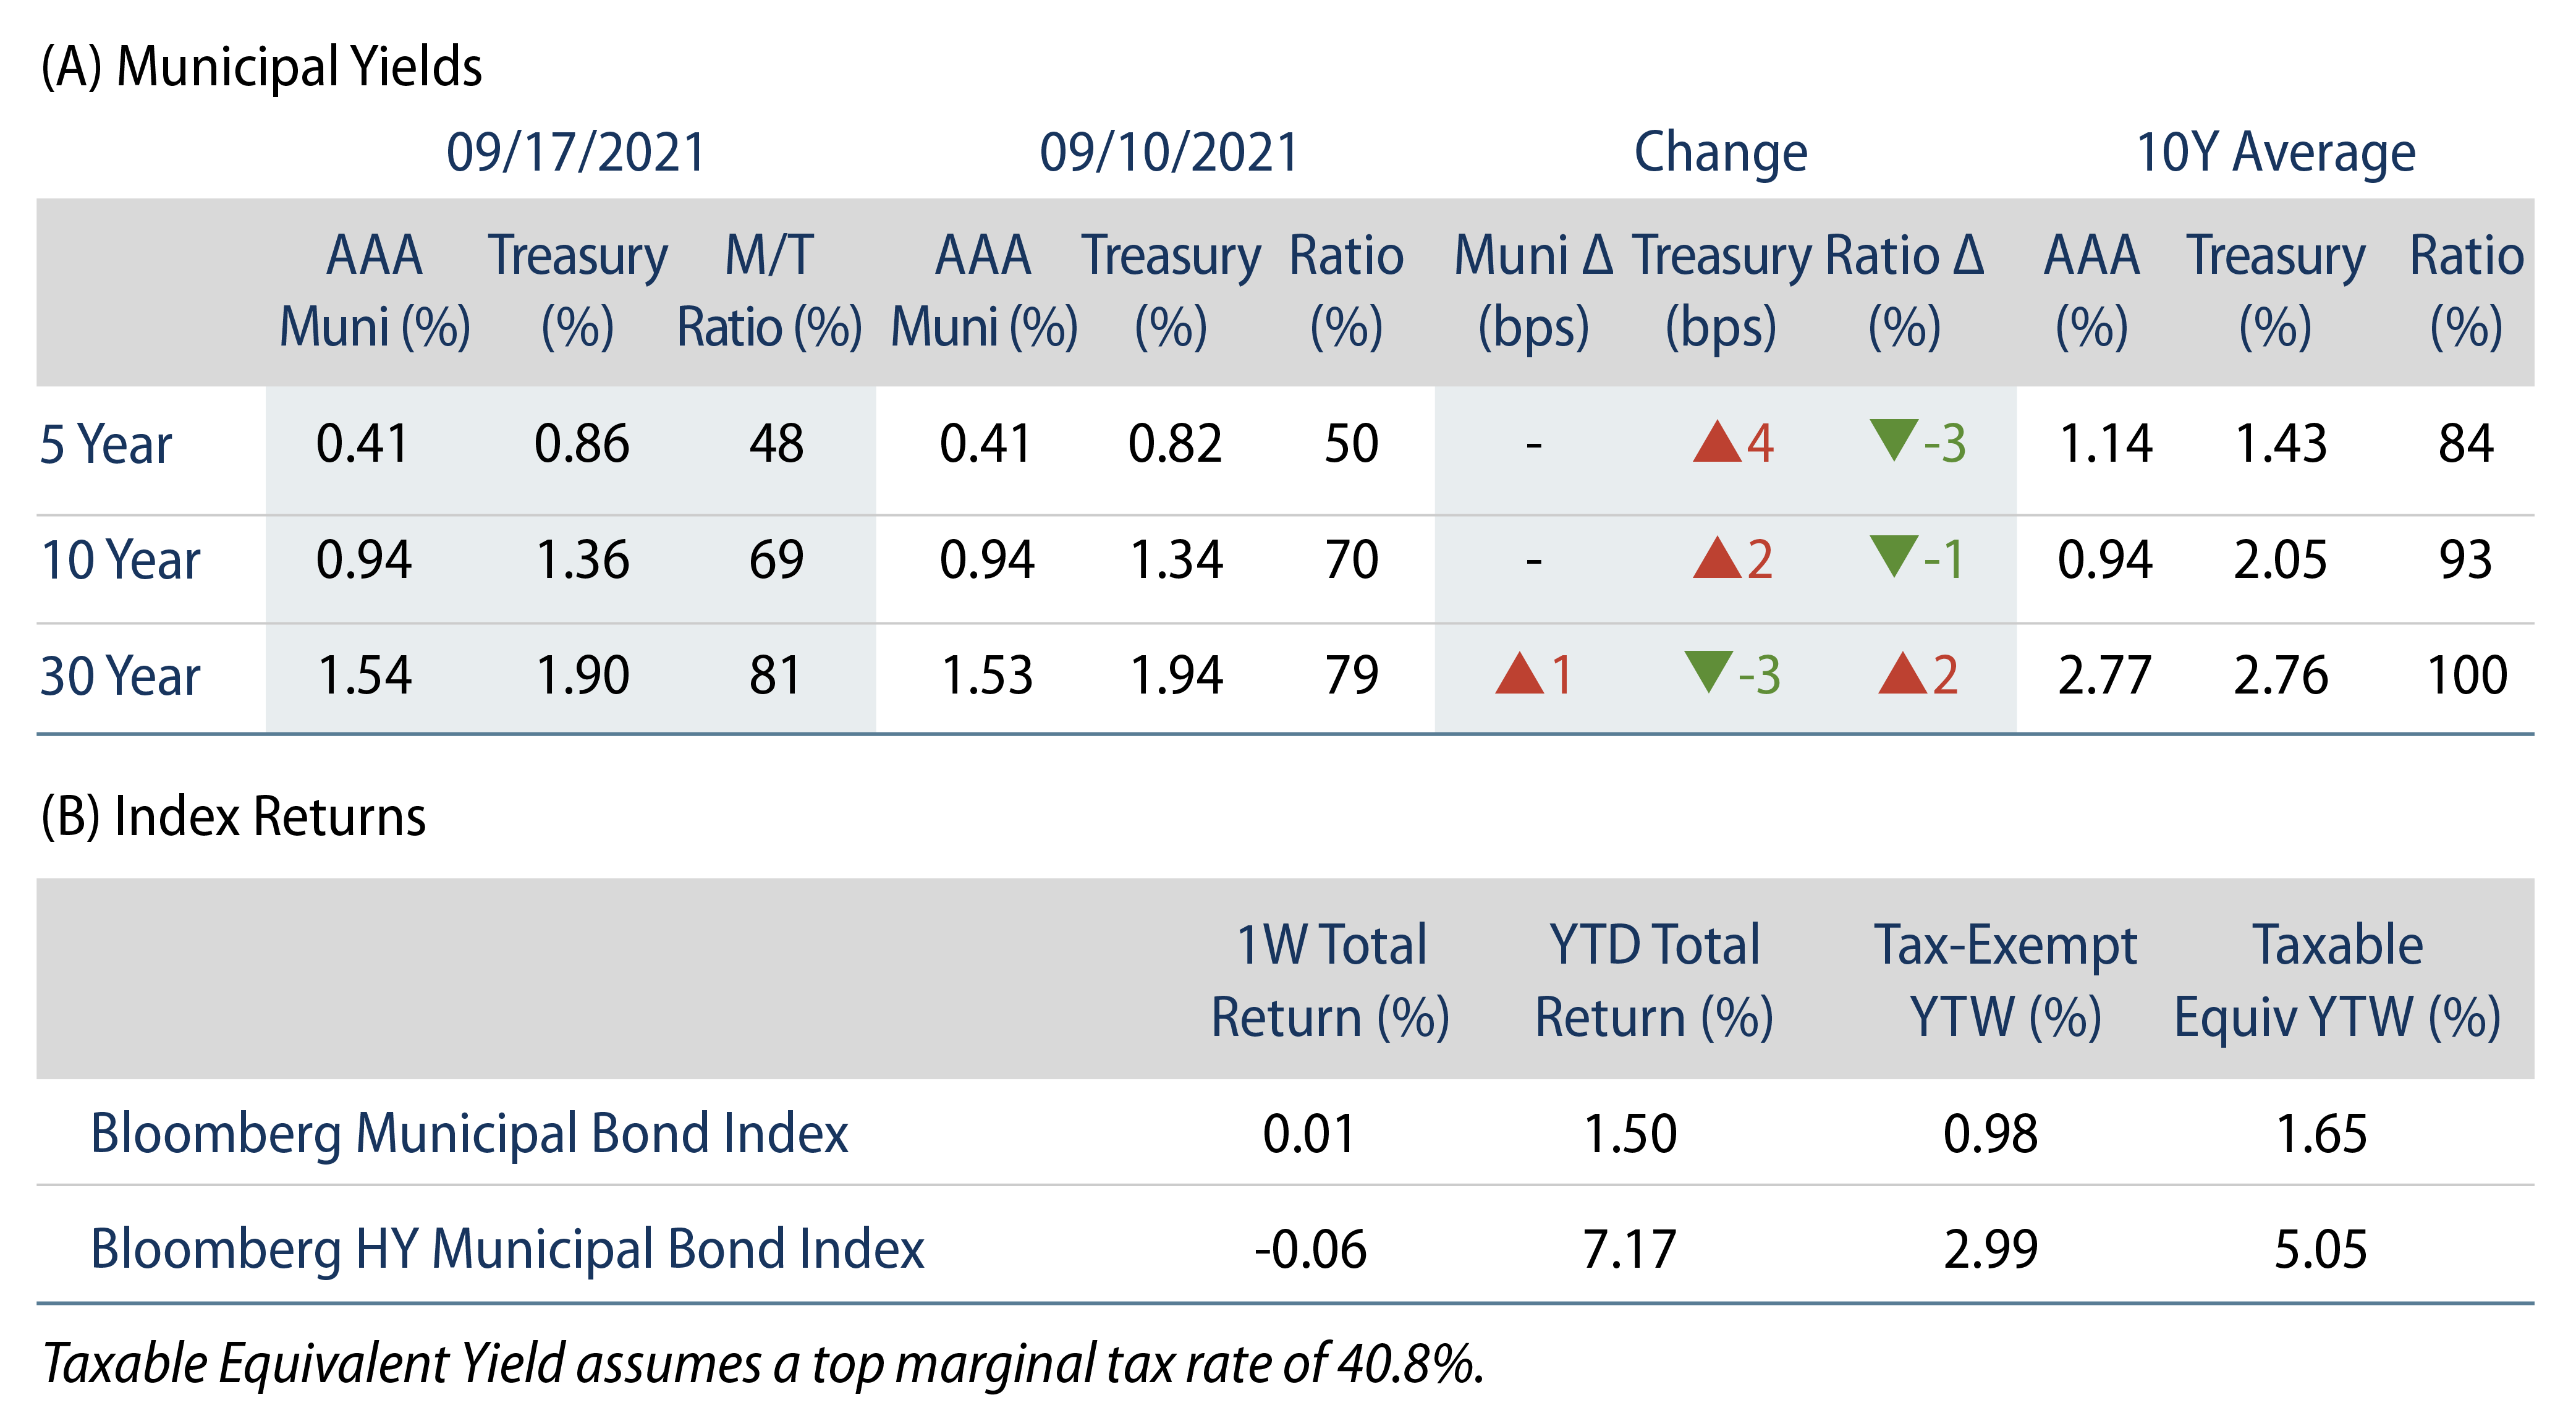 Municipal Yields and Index Return